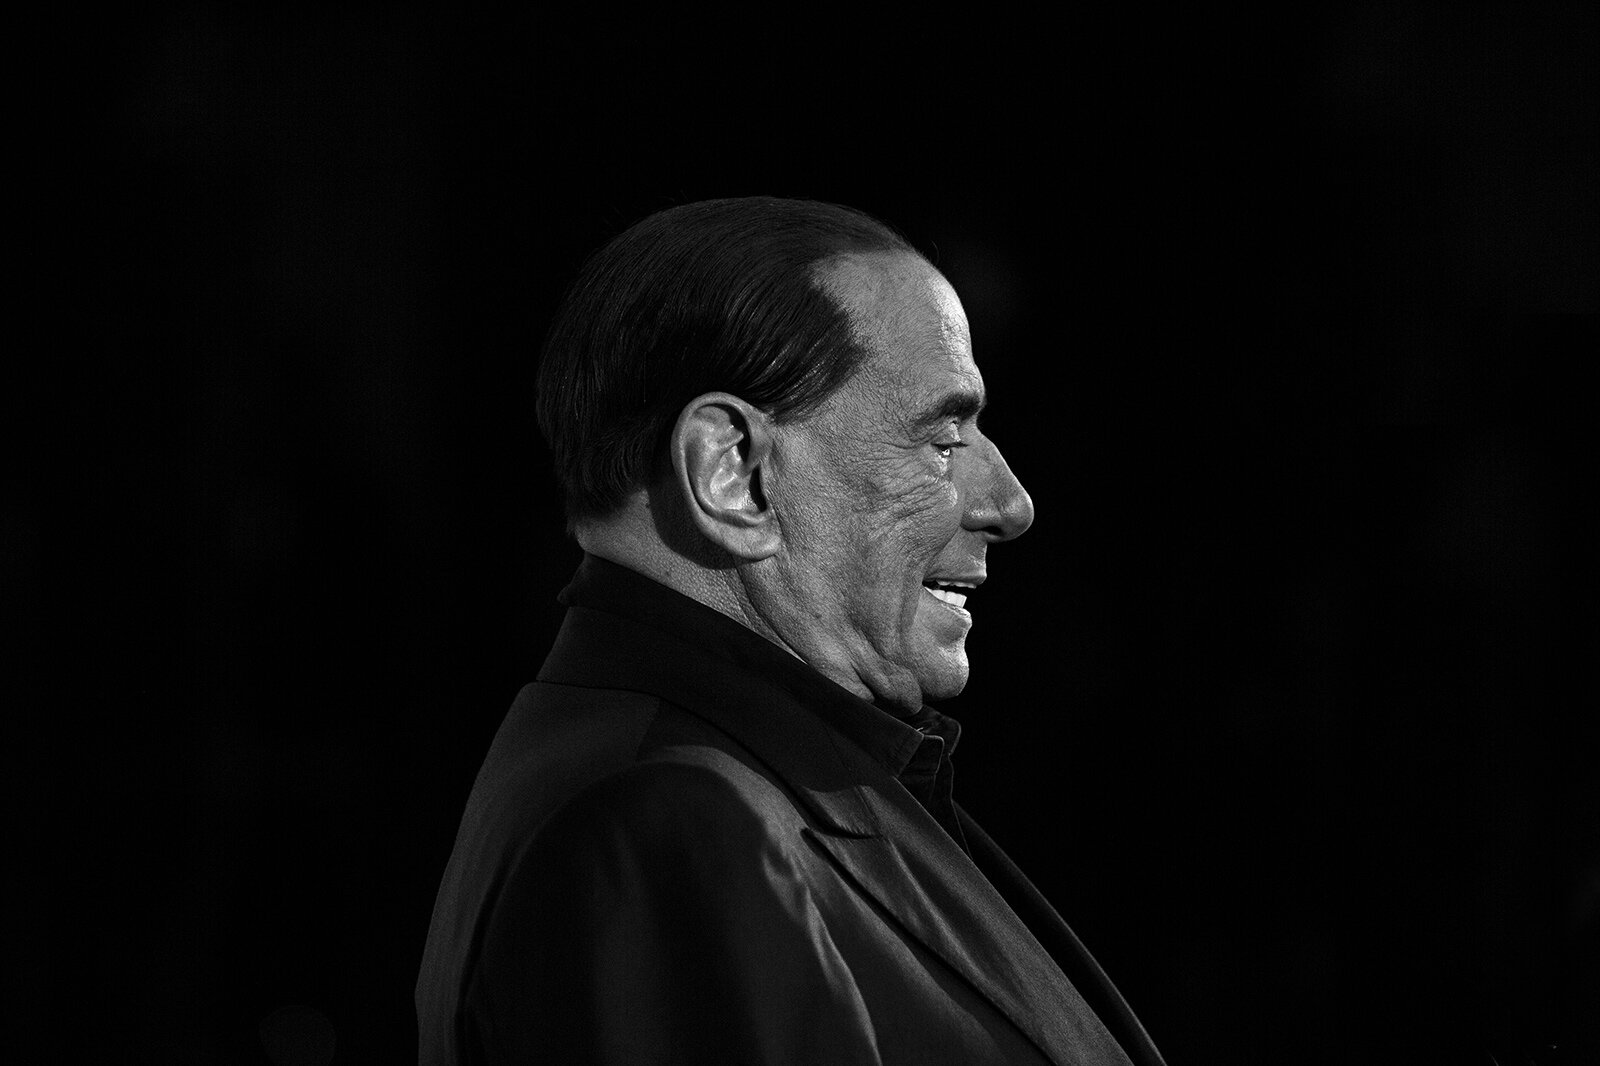  Former Italian PM Silvio Berlusconi delivers a speech during a political rally on Feb. 2018 in Milan, Italy. 